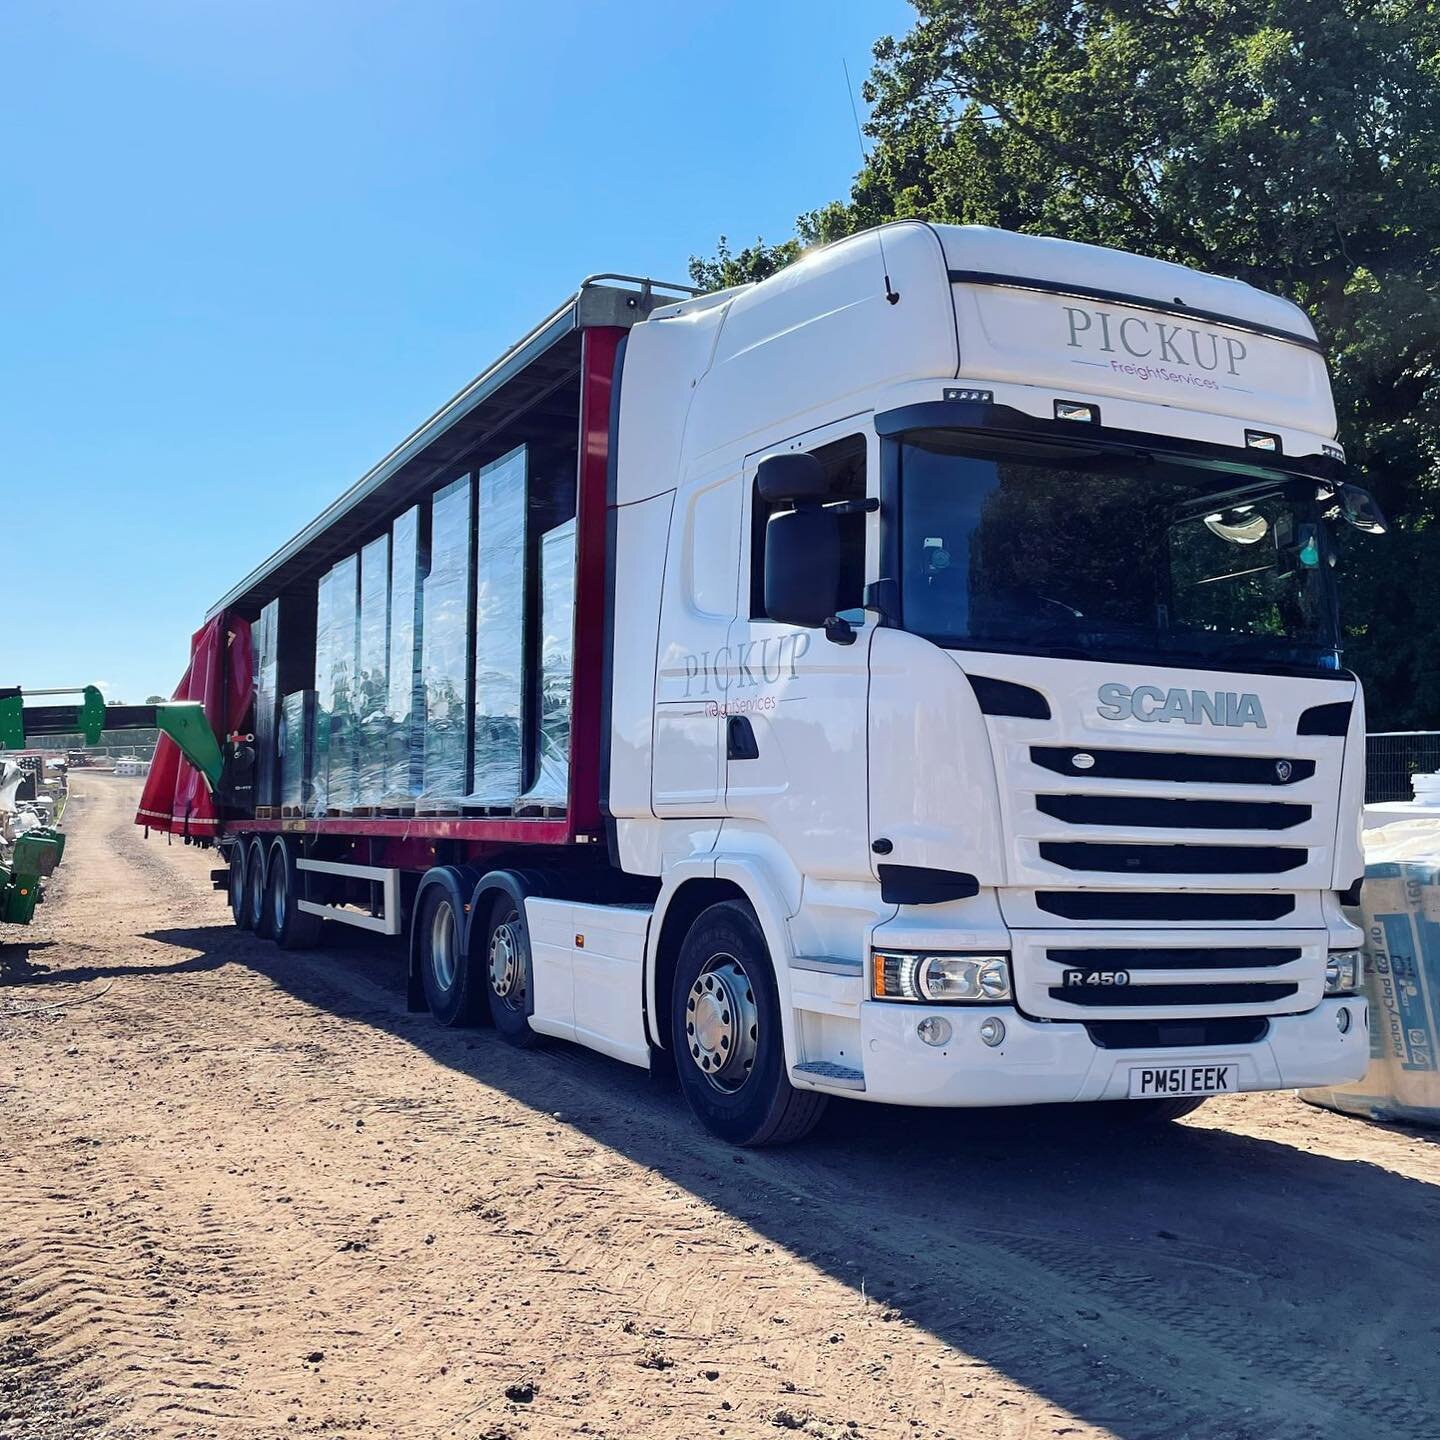 Delivery made easy! Give us a ring today to get an instant quote ☎️ 

✅Bespoke arrangements
✅Storage, cross docking and loading facilities available
✅Towing services 
✅Highly qualified, experienced team

#transport #haulage #haul #uktransport #ukflee